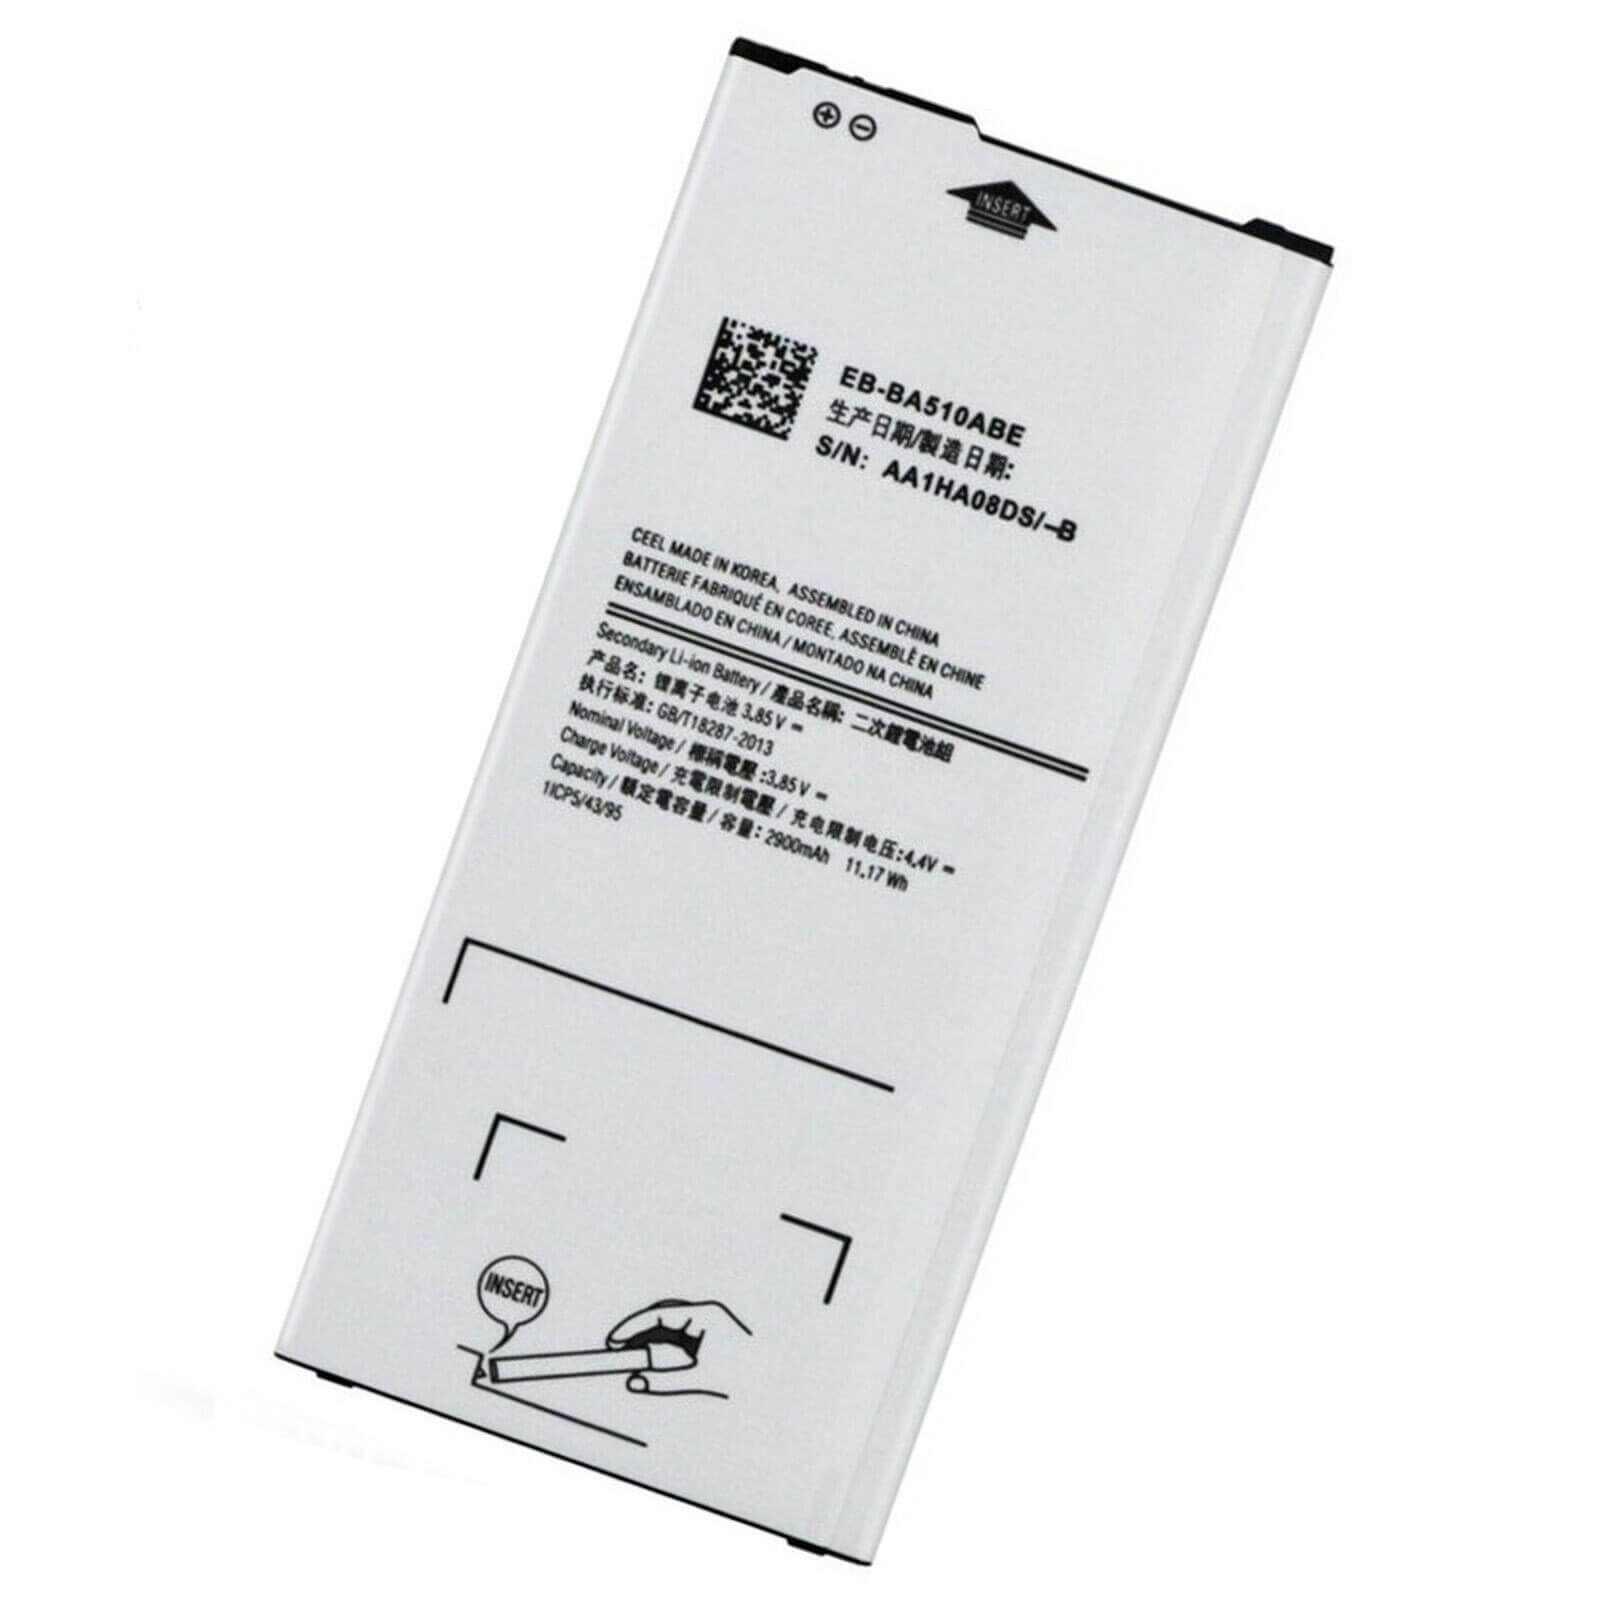 Replacement Battery For Samsung Galaxy A5 2016 - EB-BA510ABE